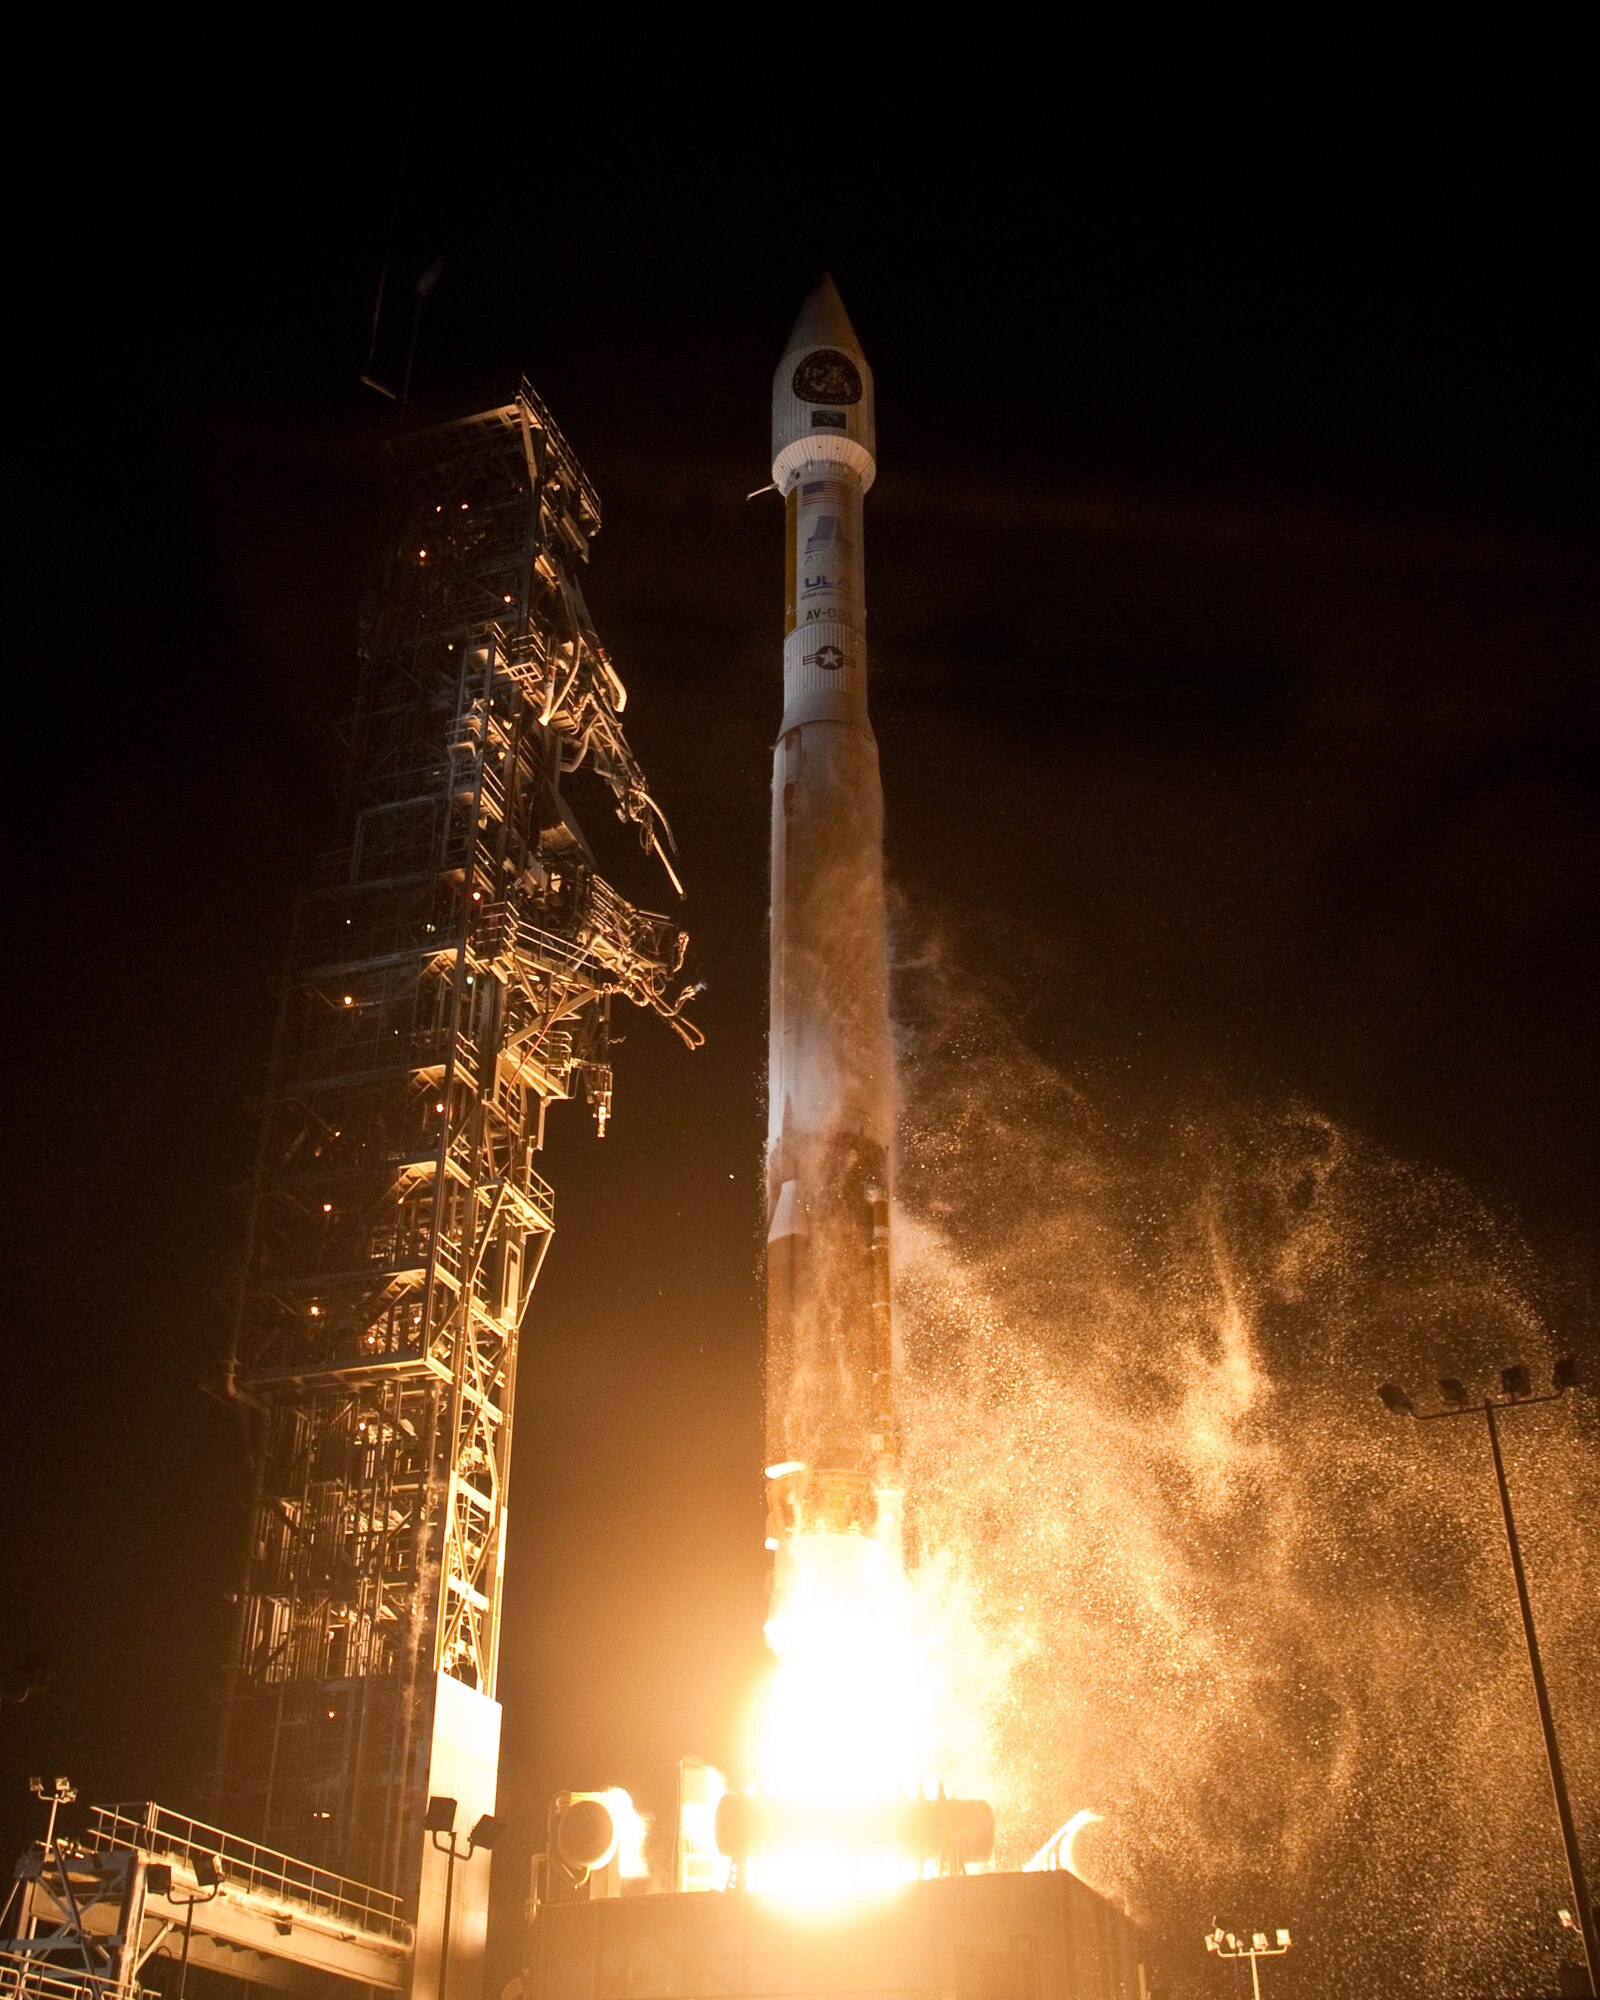 VANDENBERG AIR FORCE BASE, Calif. - Team Vandenberg launched an Atlas V from Space Launch Complex-3 here April 14 at 9:24 p.m. PDT. It was the fourth Atlas V processed at Vandenberg and the 605th overall Atlas mission in U.S. history. (Photo courtesy of the United Launch Alliance)